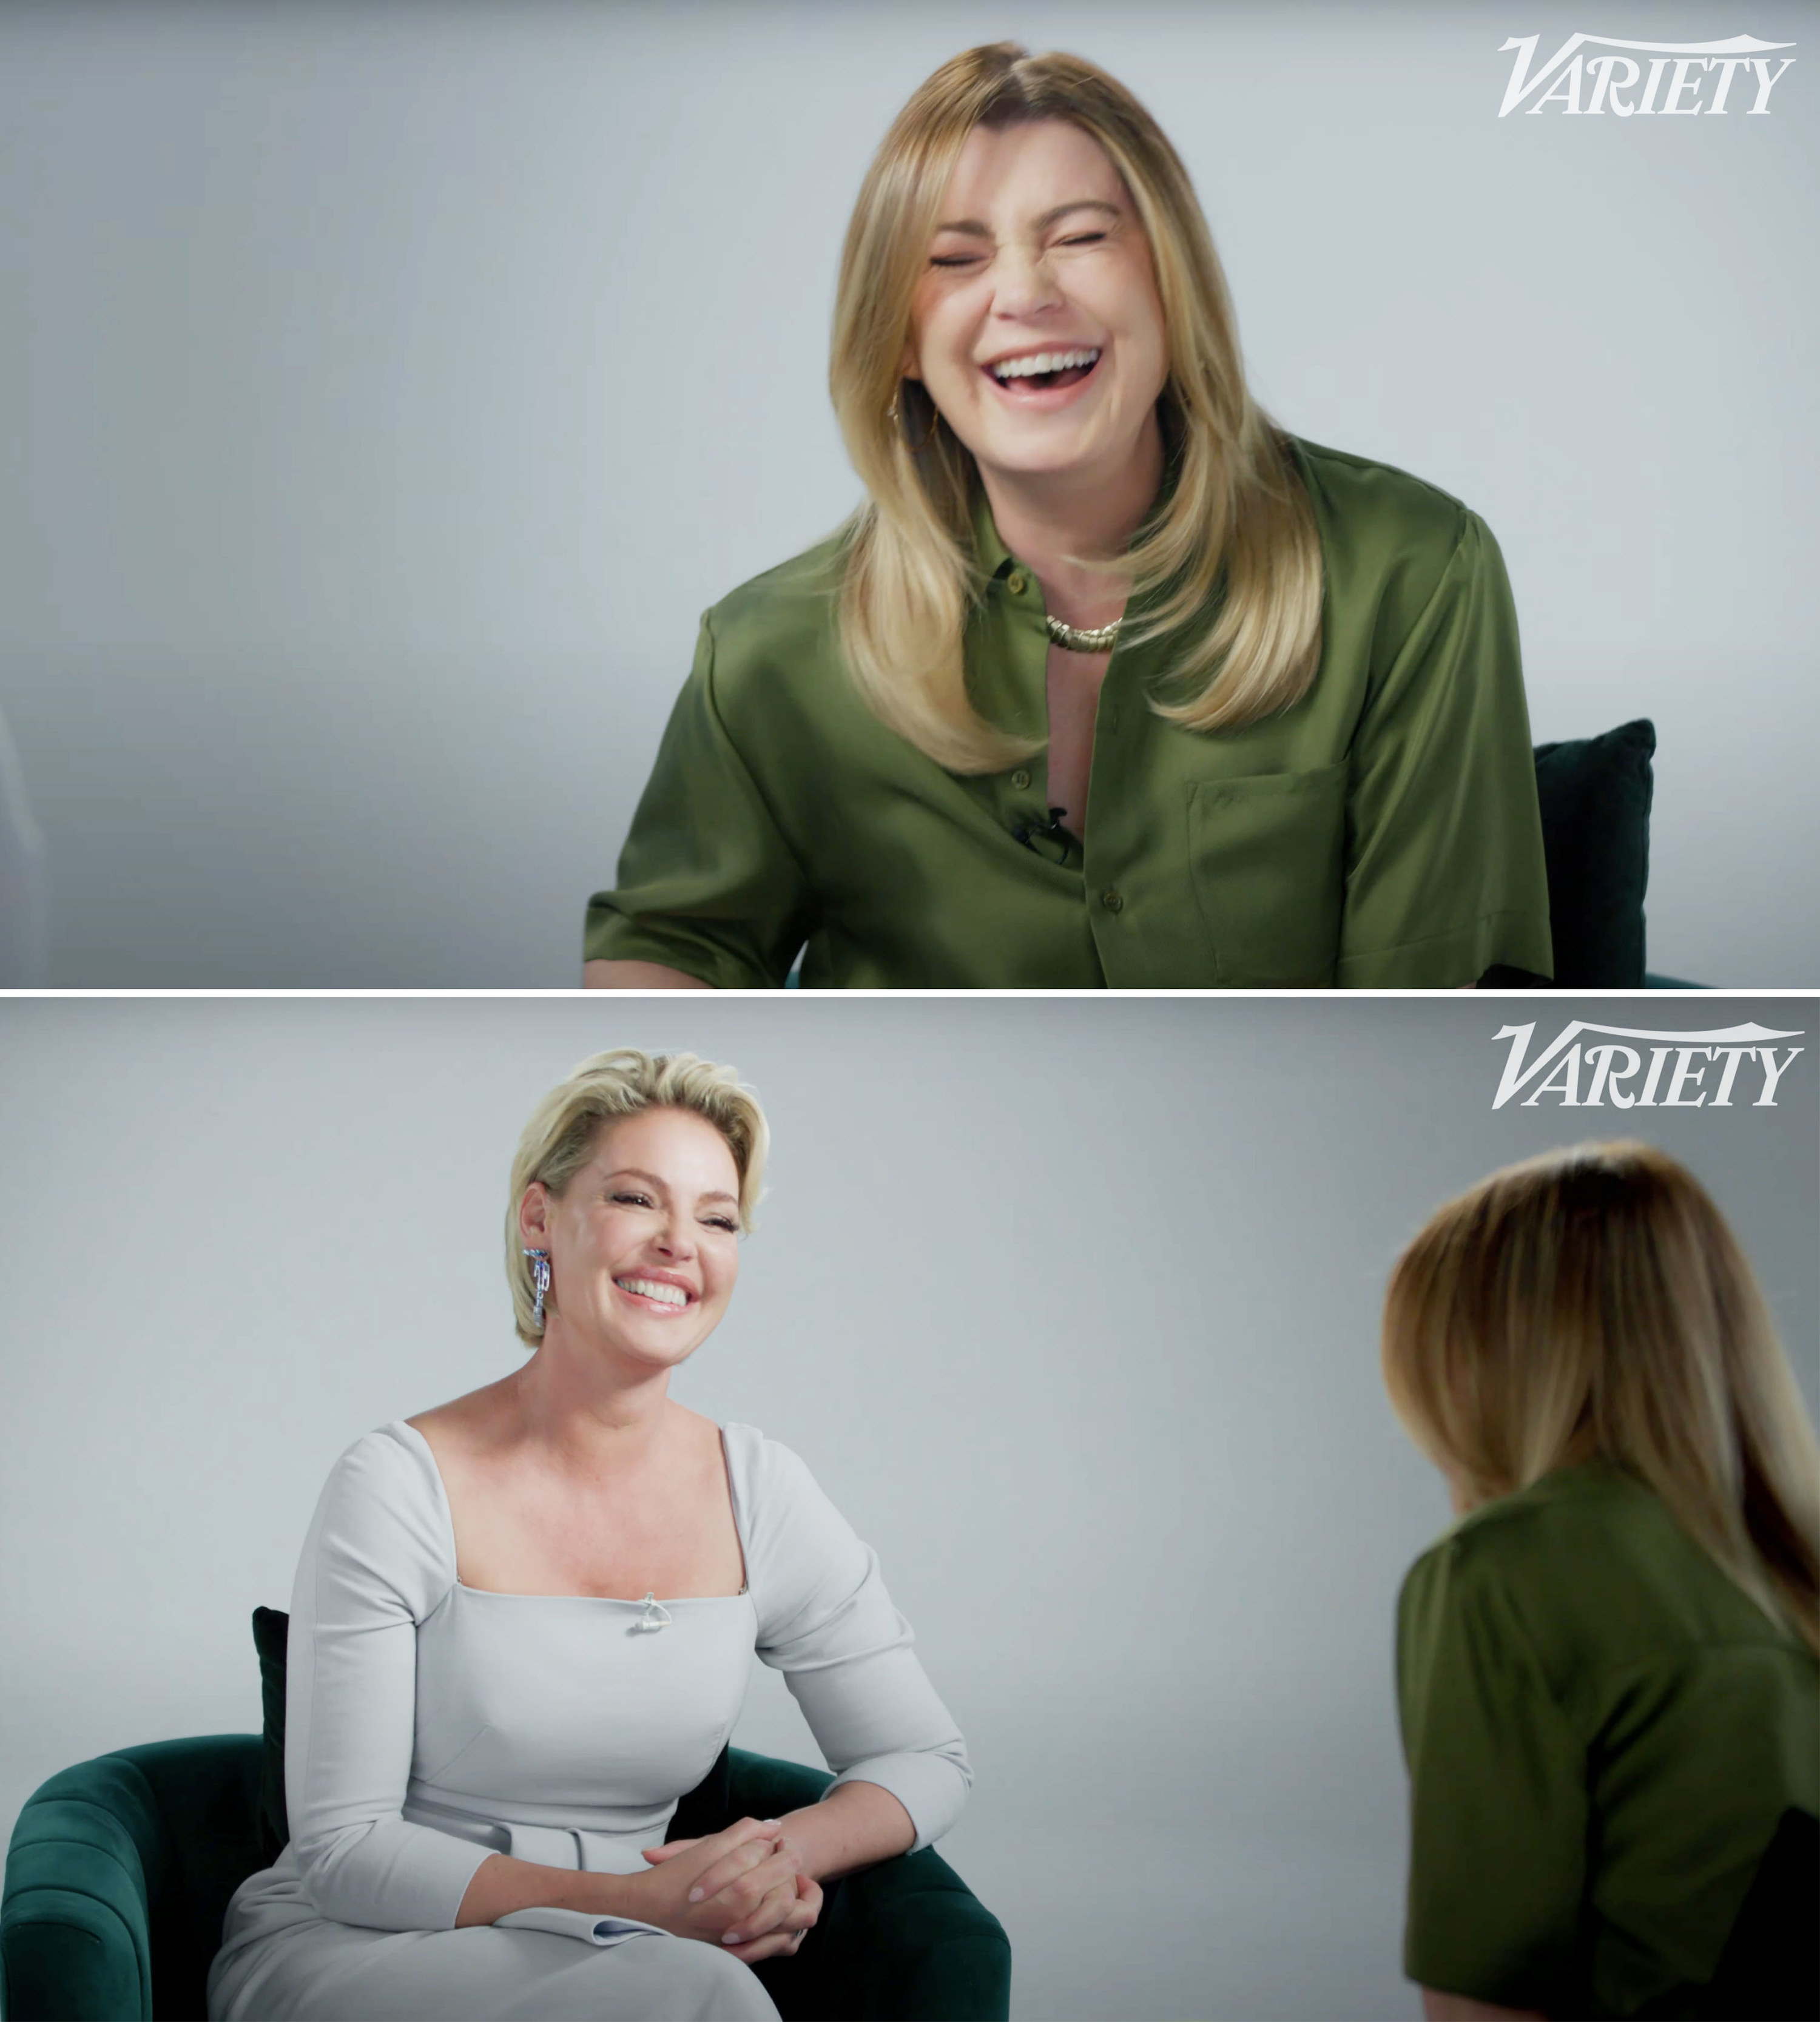 Ellen Pompeo and Katherine Heigl interviewing each other